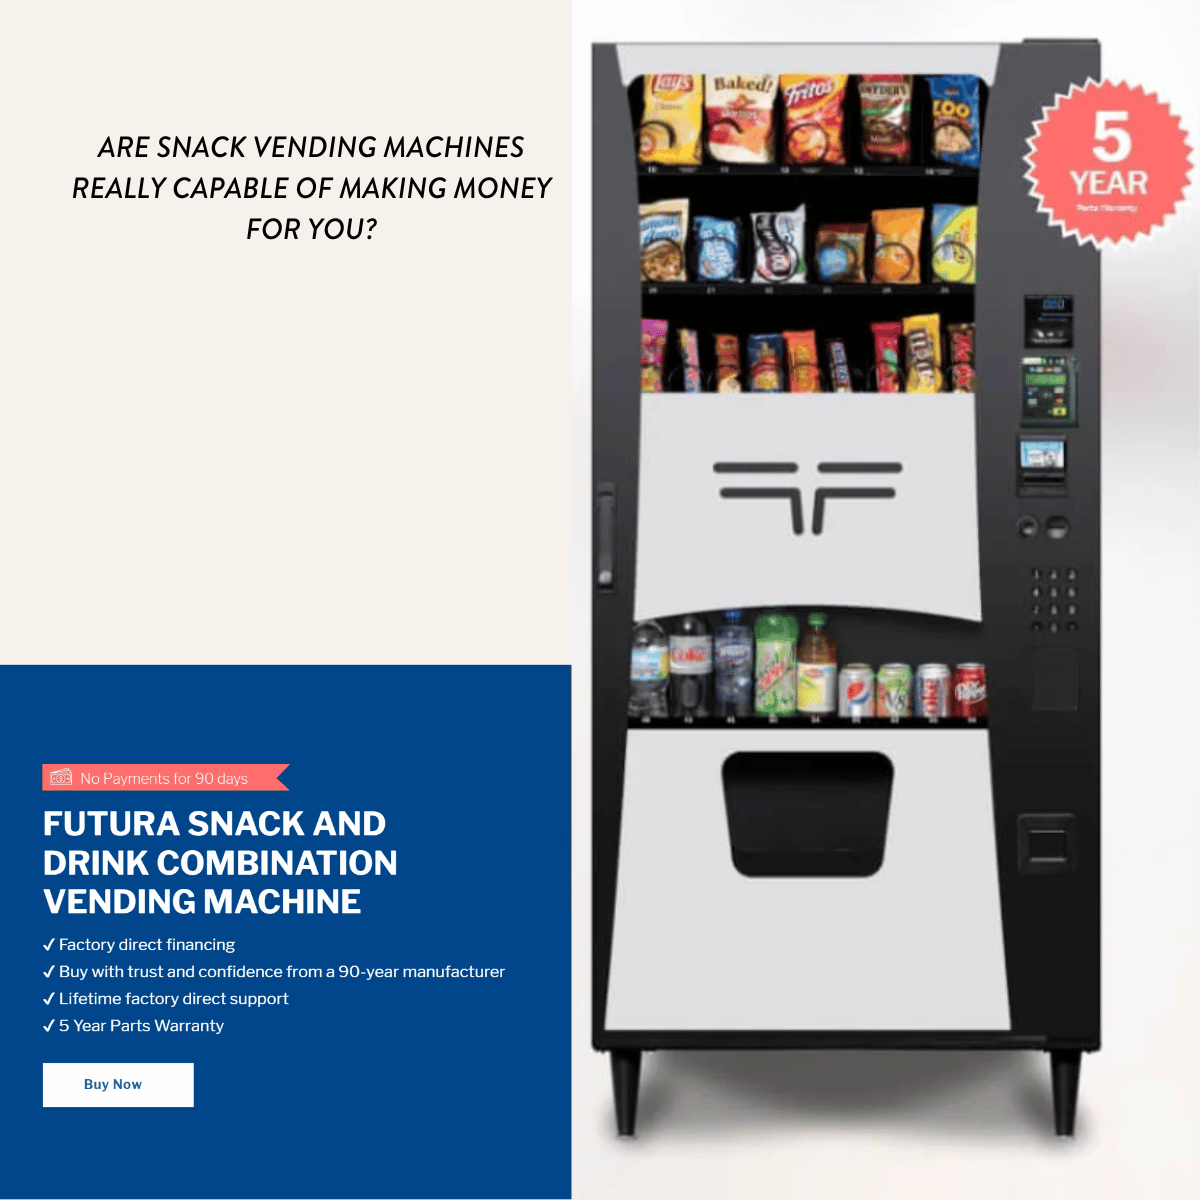 VENDING MACHINES CAN MAKE A GREAT SECOND INCOME